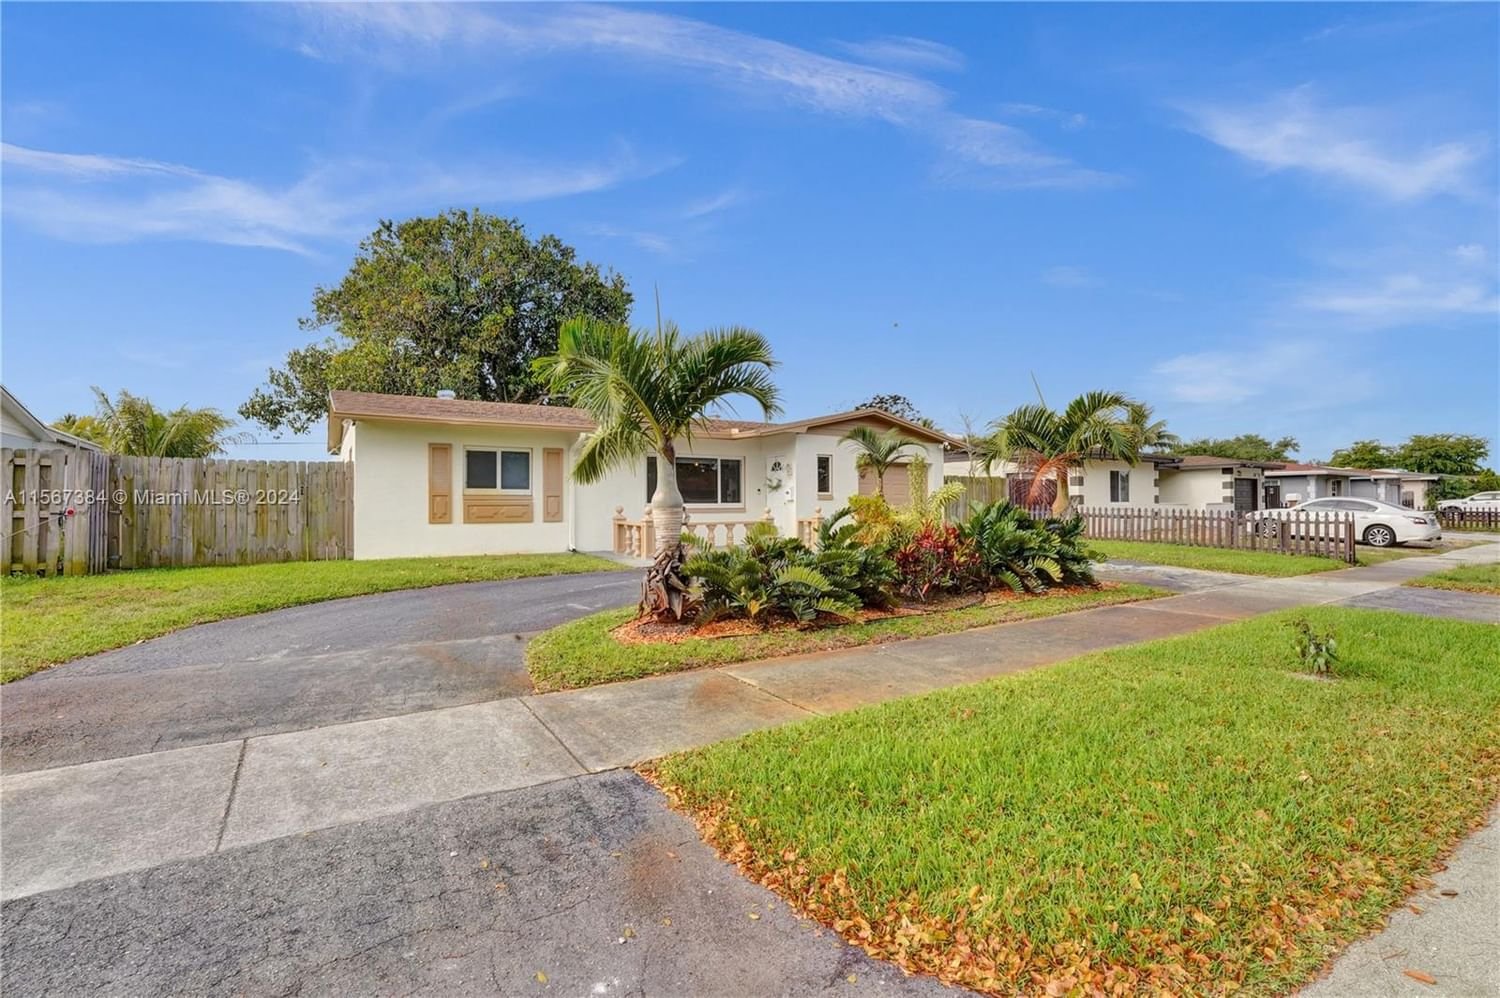 Real estate property located at 7304 Mckinley St, Broward County, BOULEVARD HEIGHTS SECTION, Hollywood, FL